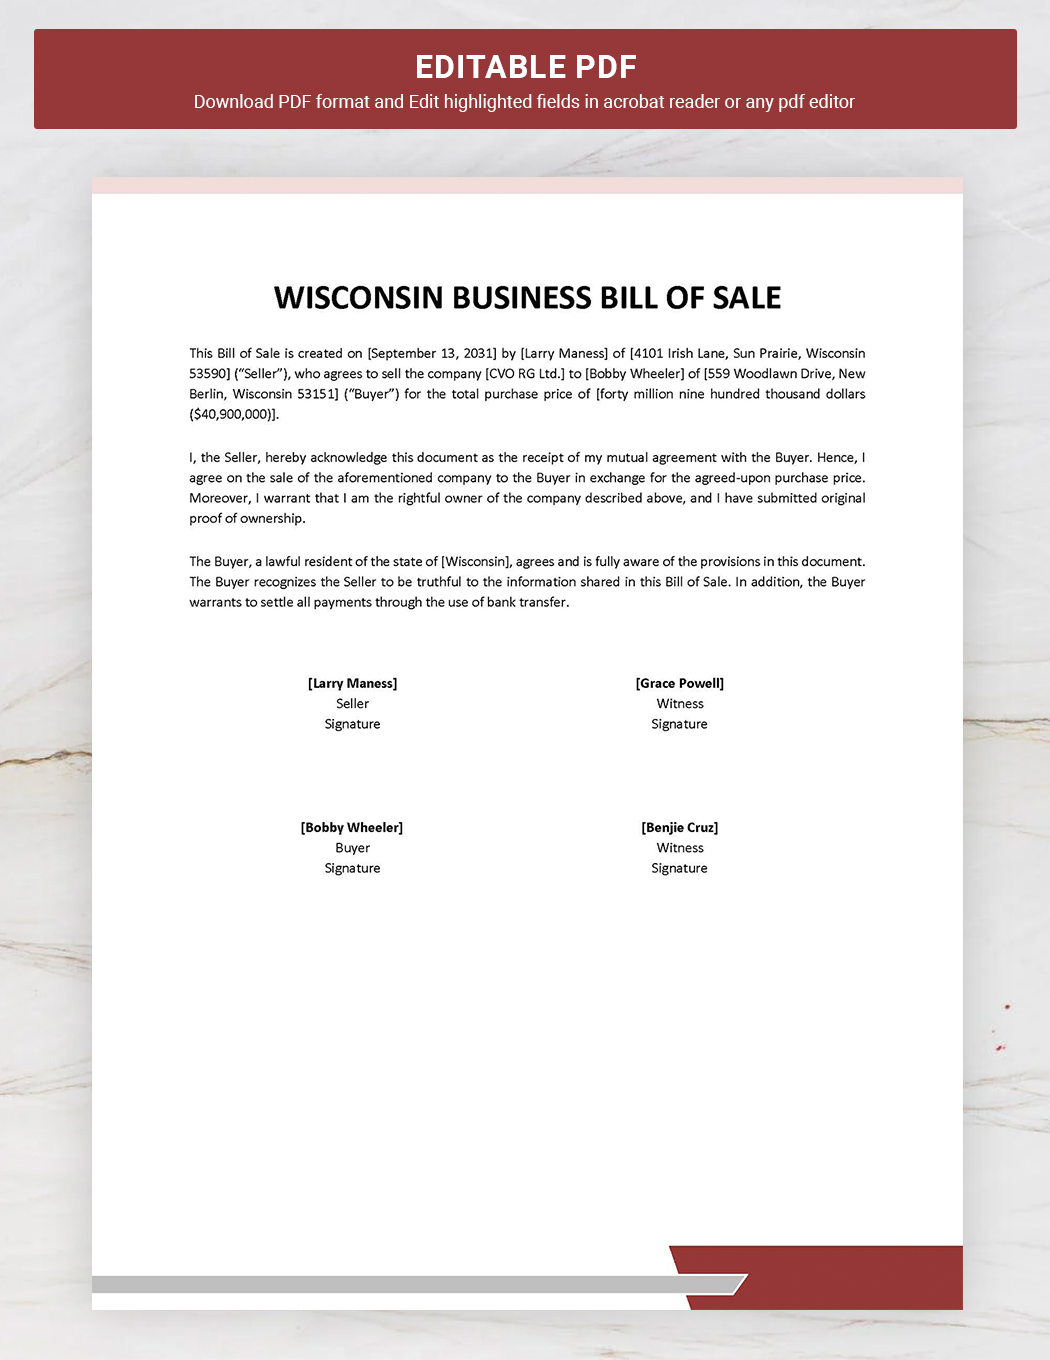 Wisconsin Business Bill of Sale Template